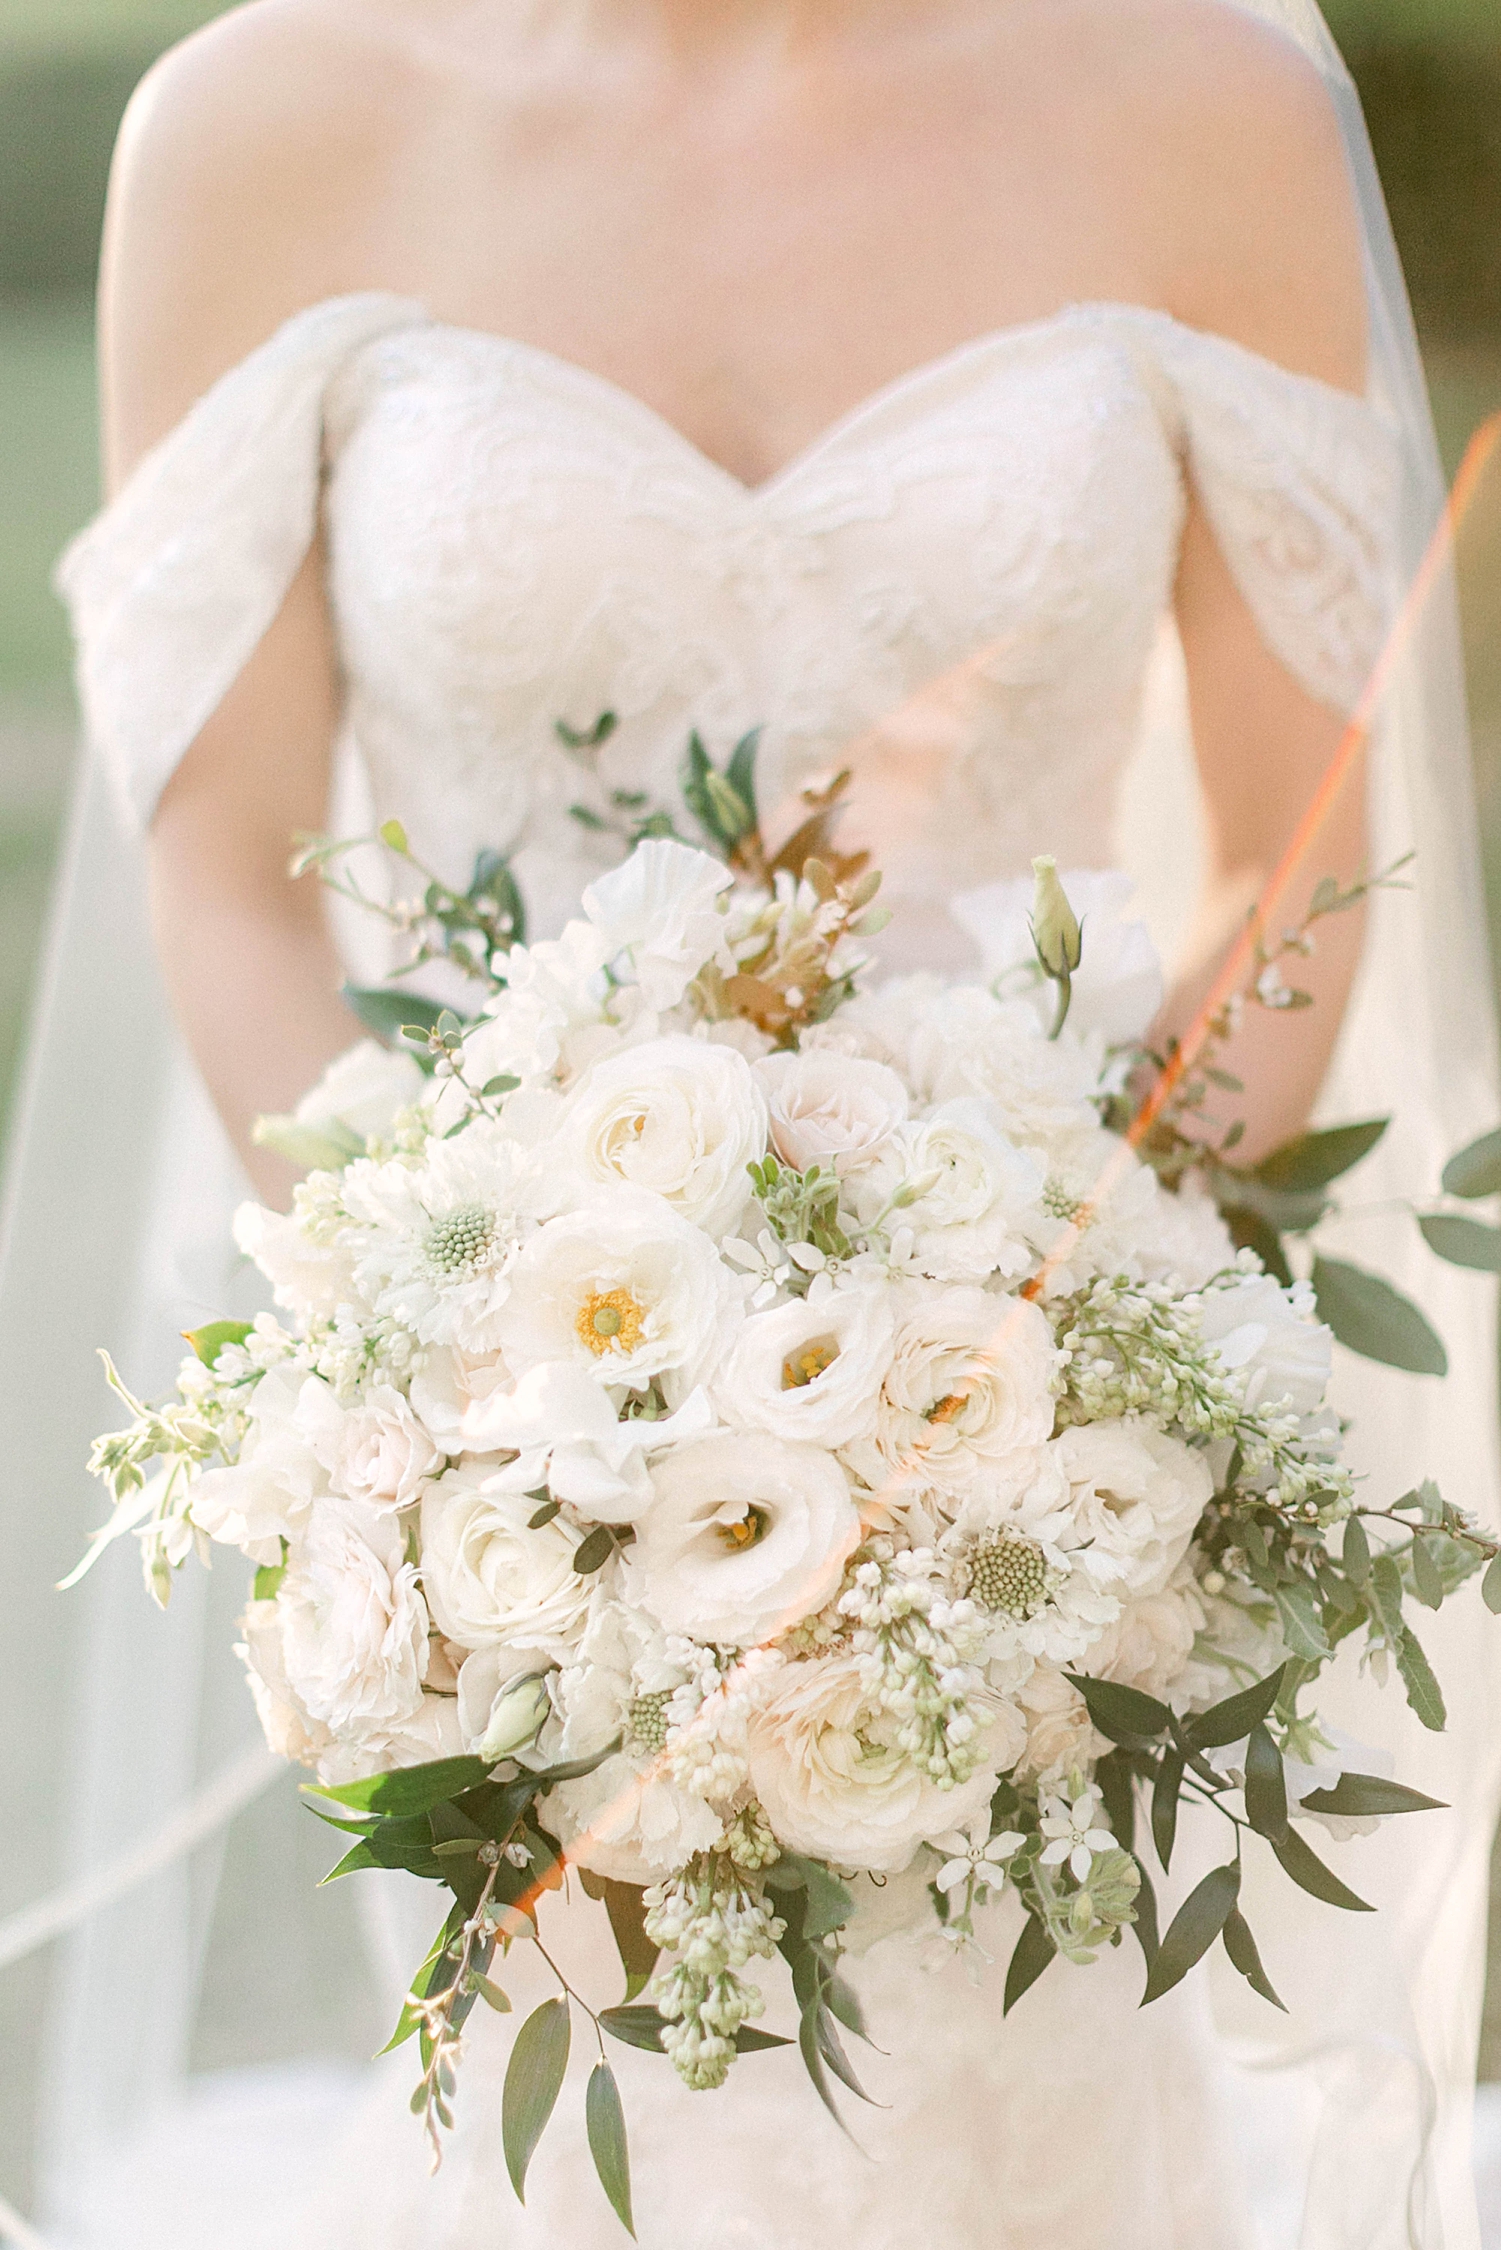 bride in lace wedding dress holding white and green floral bouquet